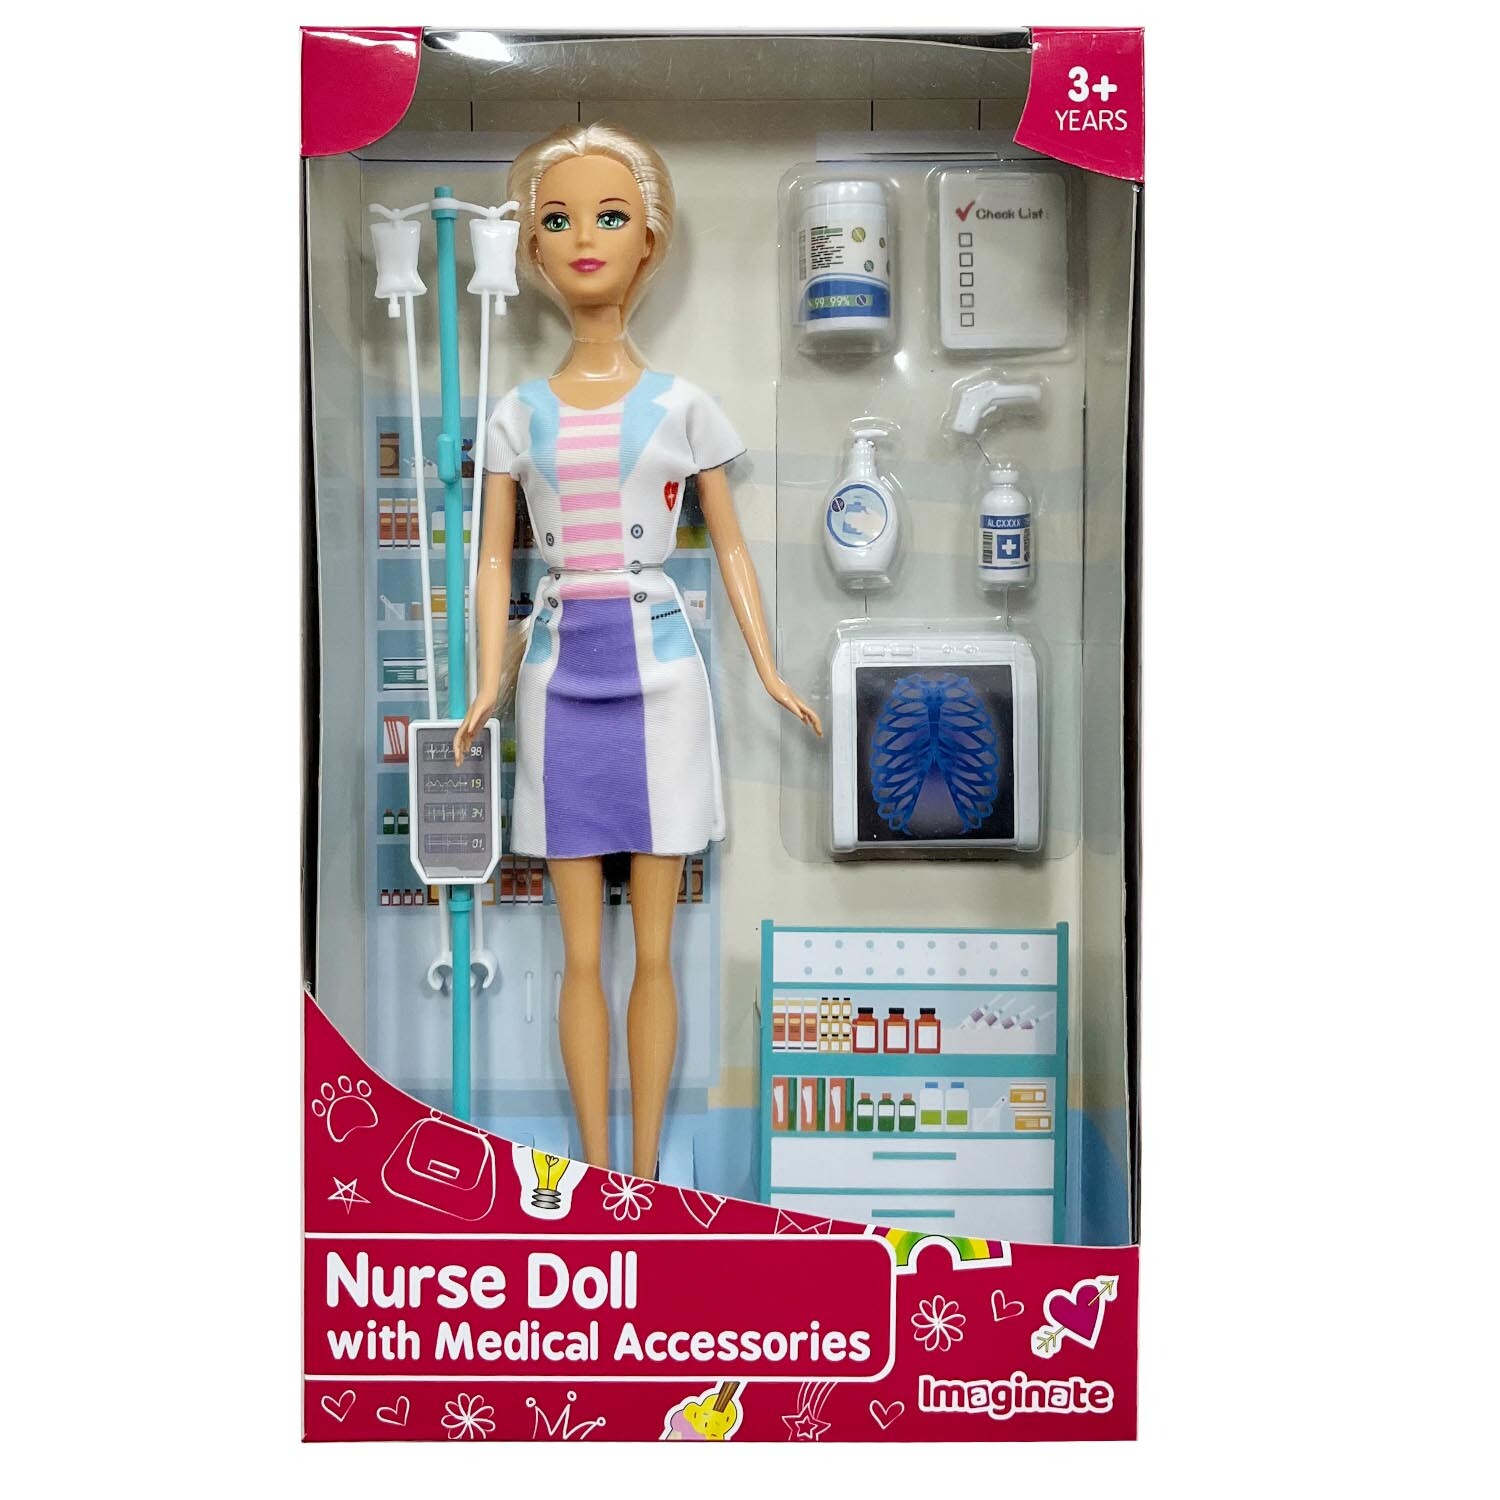 Imaginate Nurse Doll with Medical Accessories Image